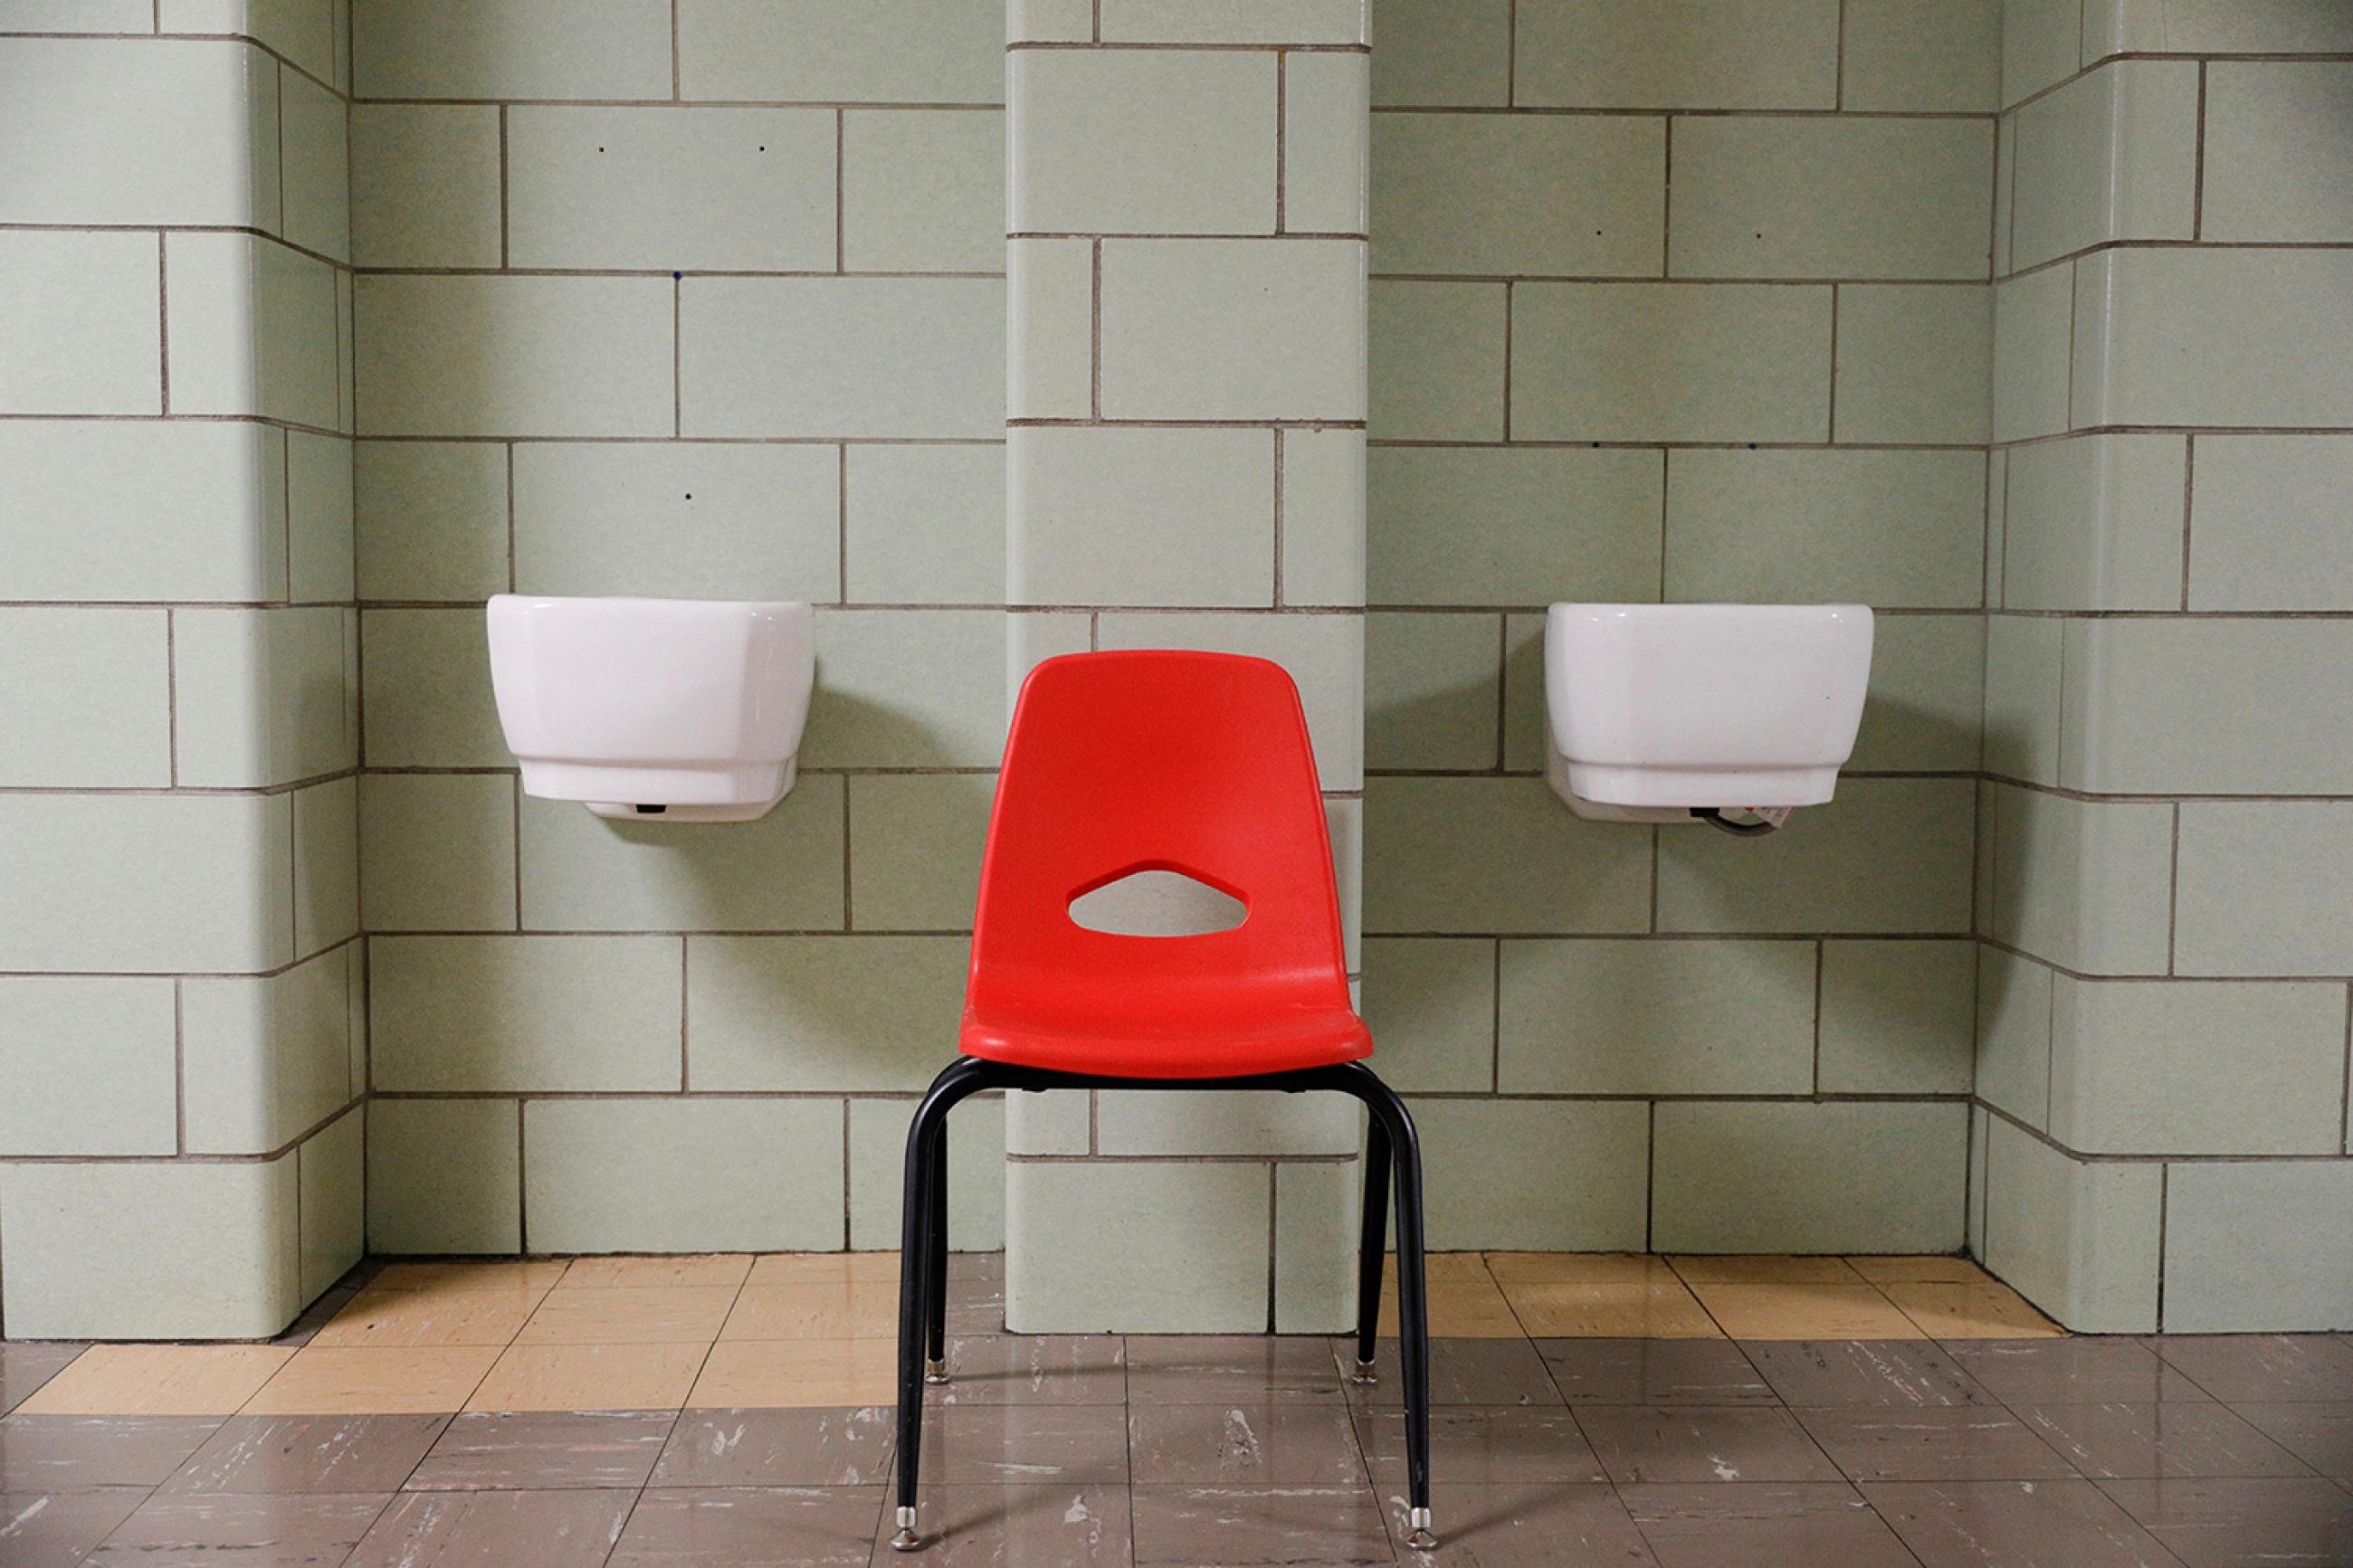 U.S. school systems are stuck between two bad choices. A classroom chair rests between two dismantled water fountains at Edmondson Westside High School in Baltimore, Maryland, on April 28, 2020. The photo shows a red chair in a beige-colorored hallway where two porticos feature white porcelain basins now dry for the pandemic. REUTERS/Tom Brenner